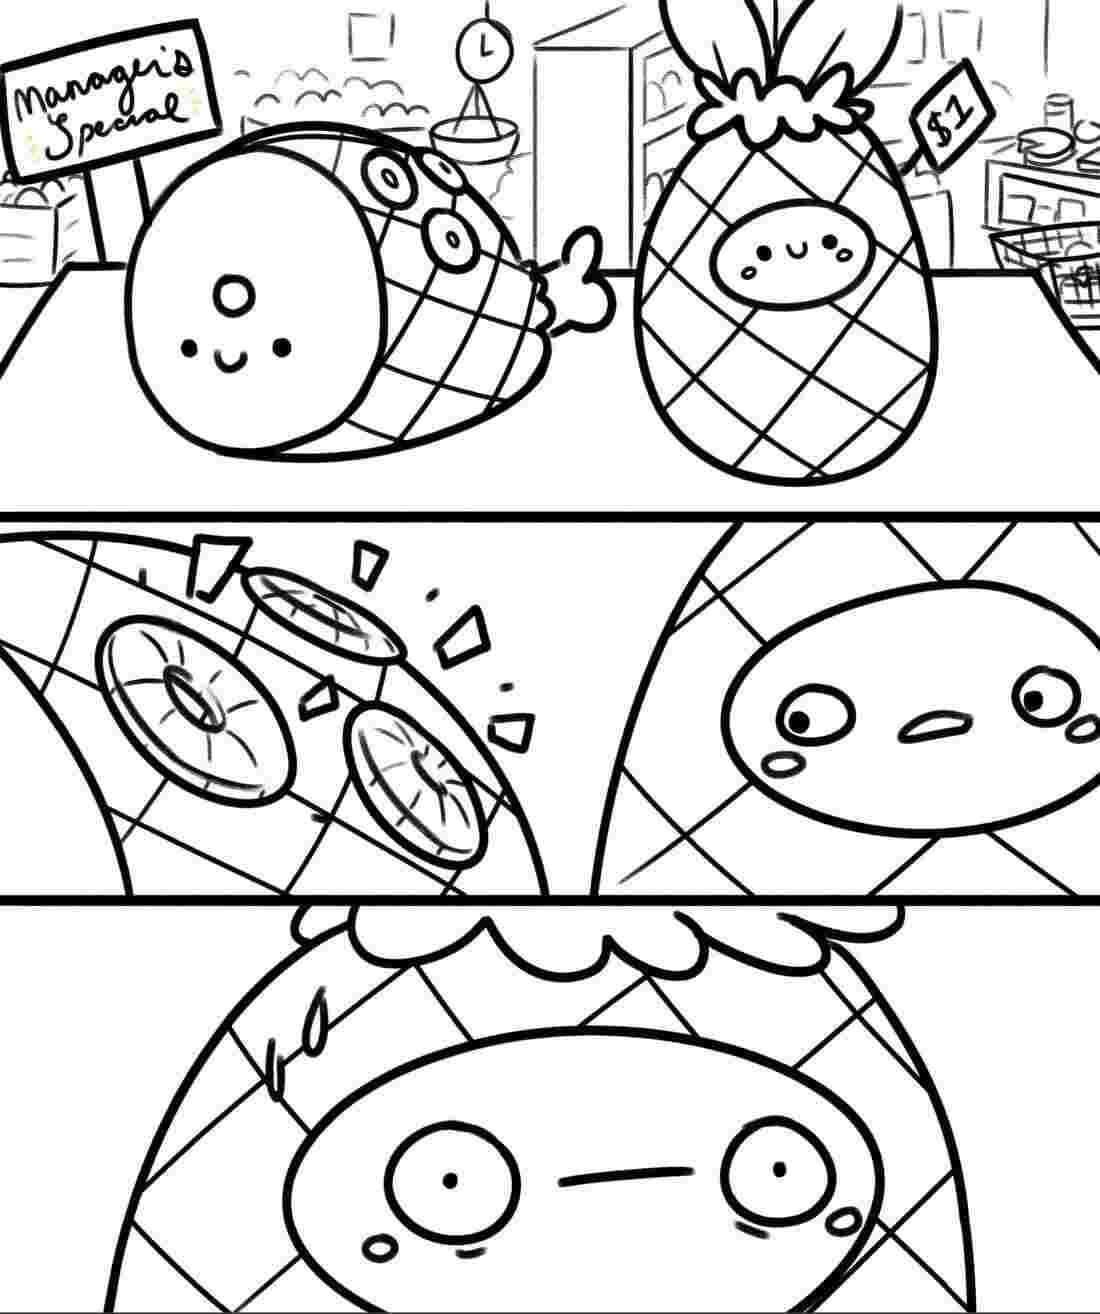 Funny Squishmallows coloring page - Download, Print or Color Online for ...